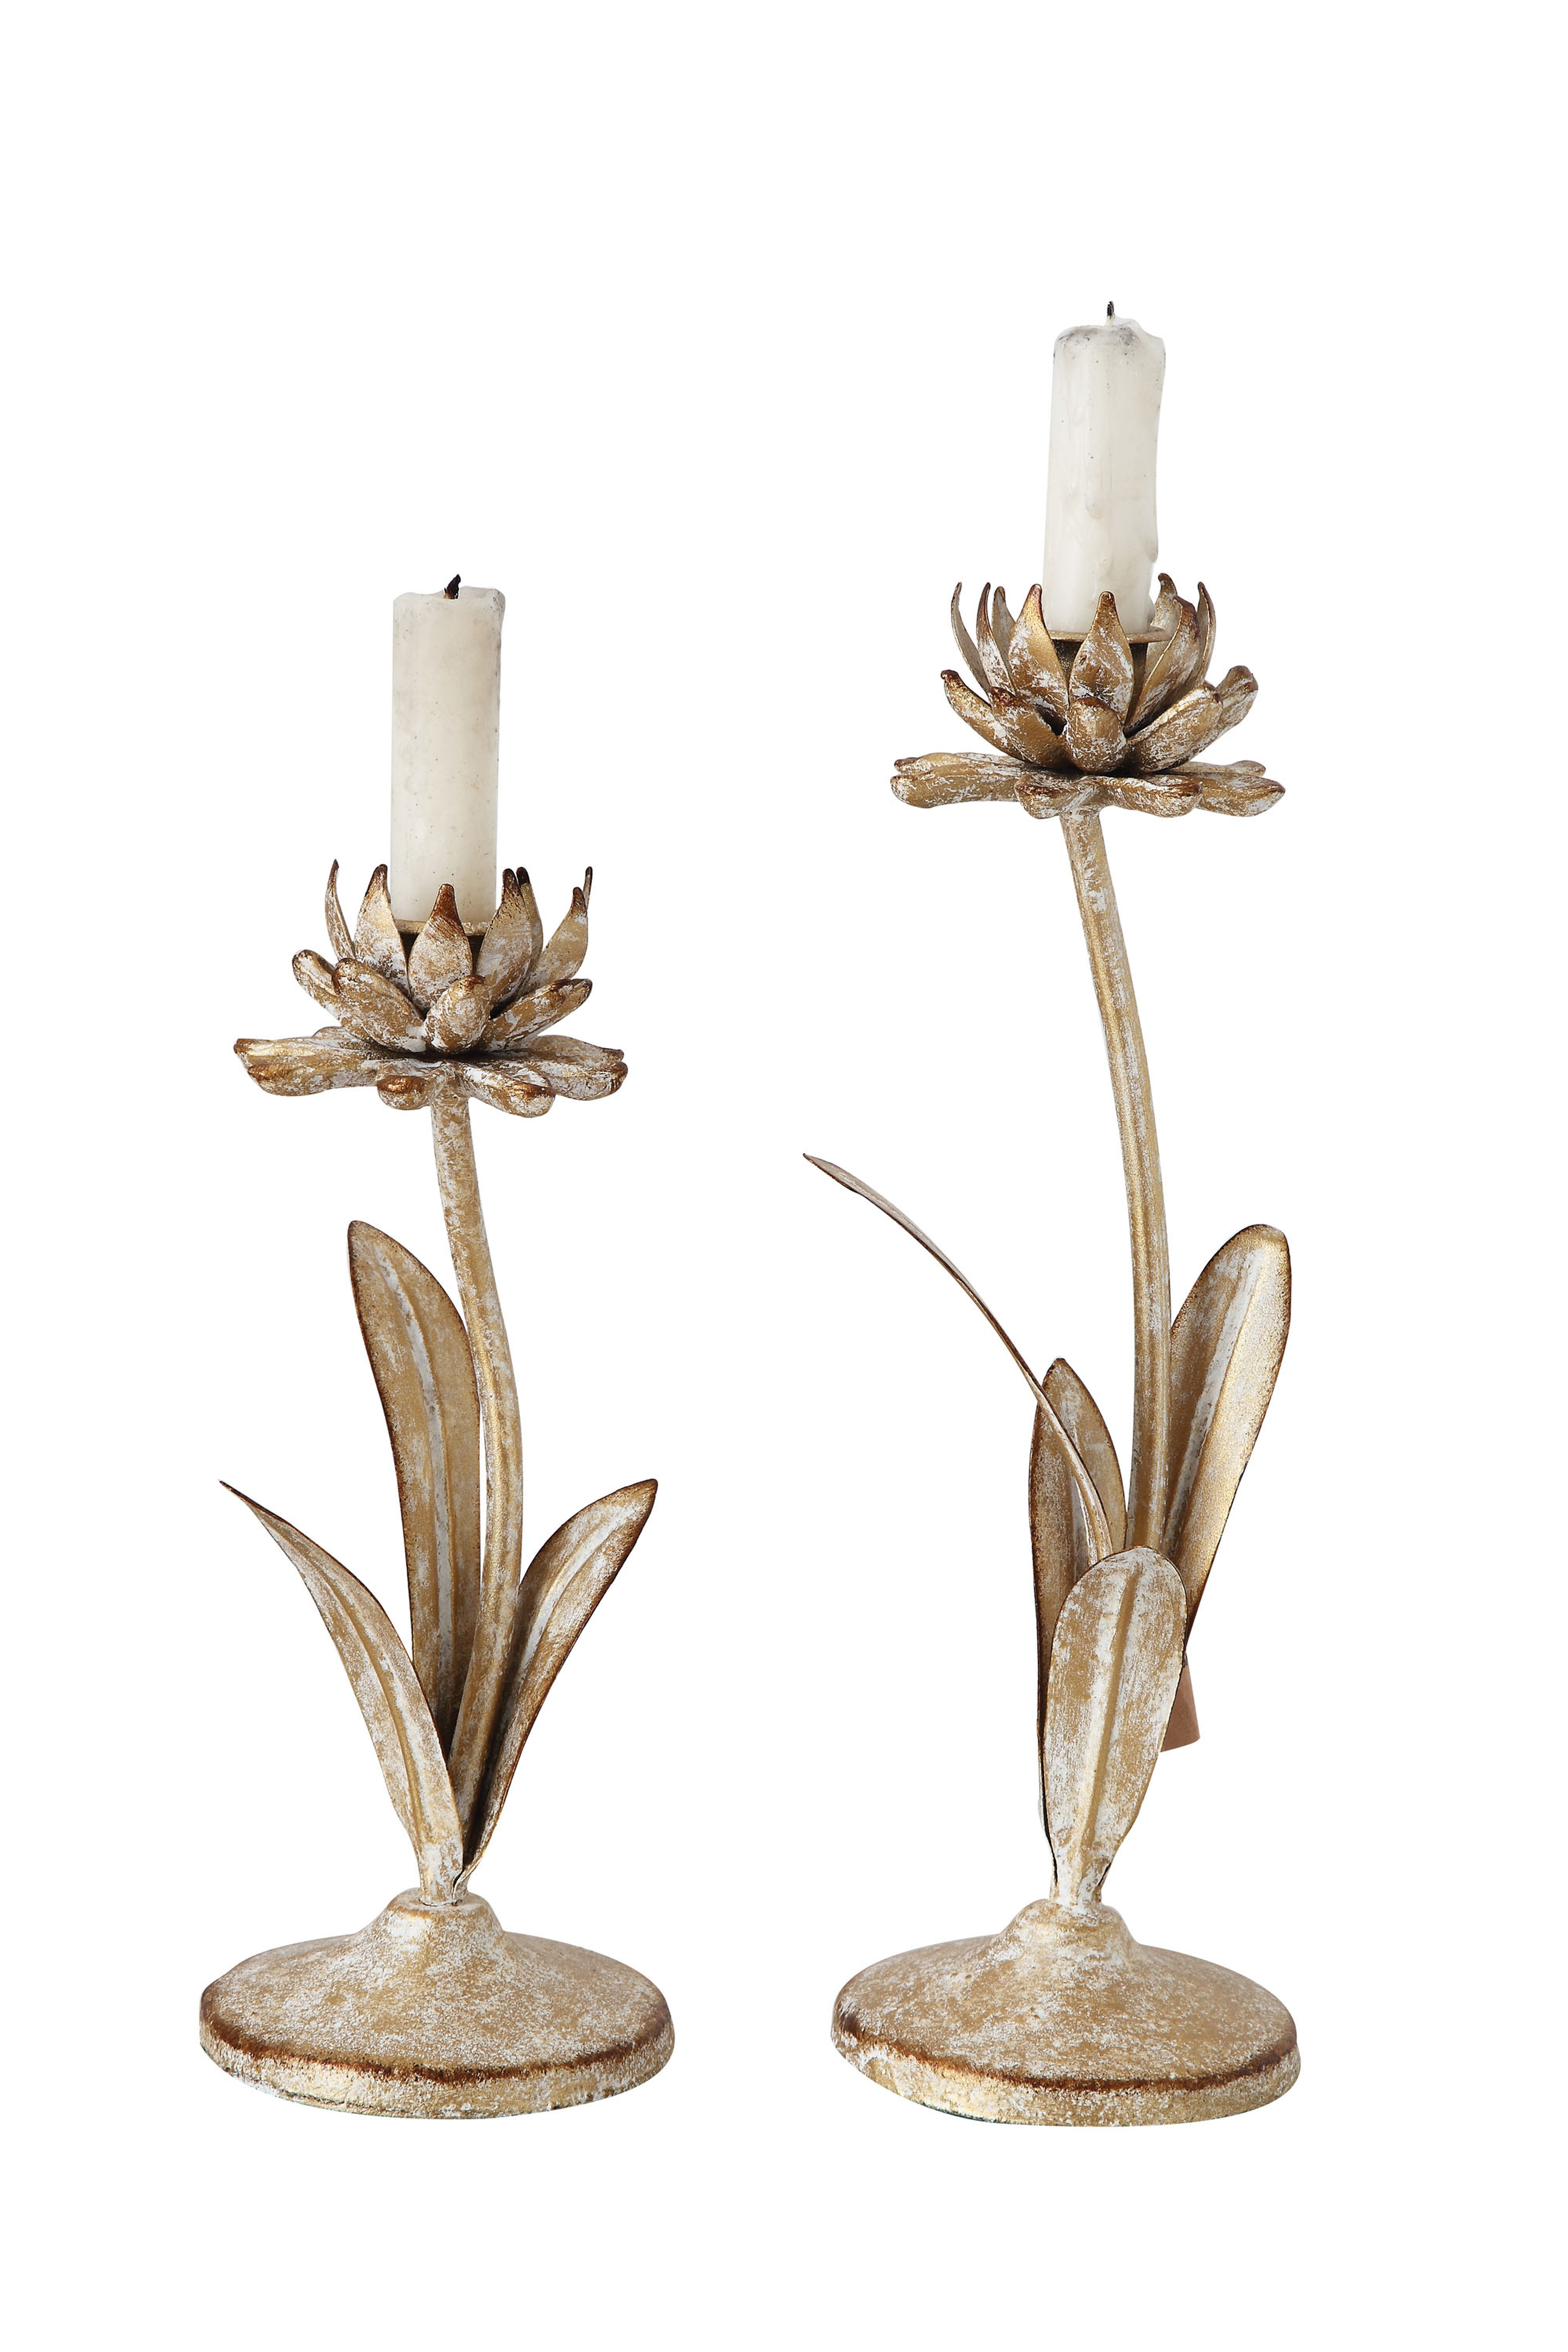 Cut Metal Flower Shaped Taper Candleholder in Distressed Gold Finish (Set of 2 Sizes) - Nomad Home